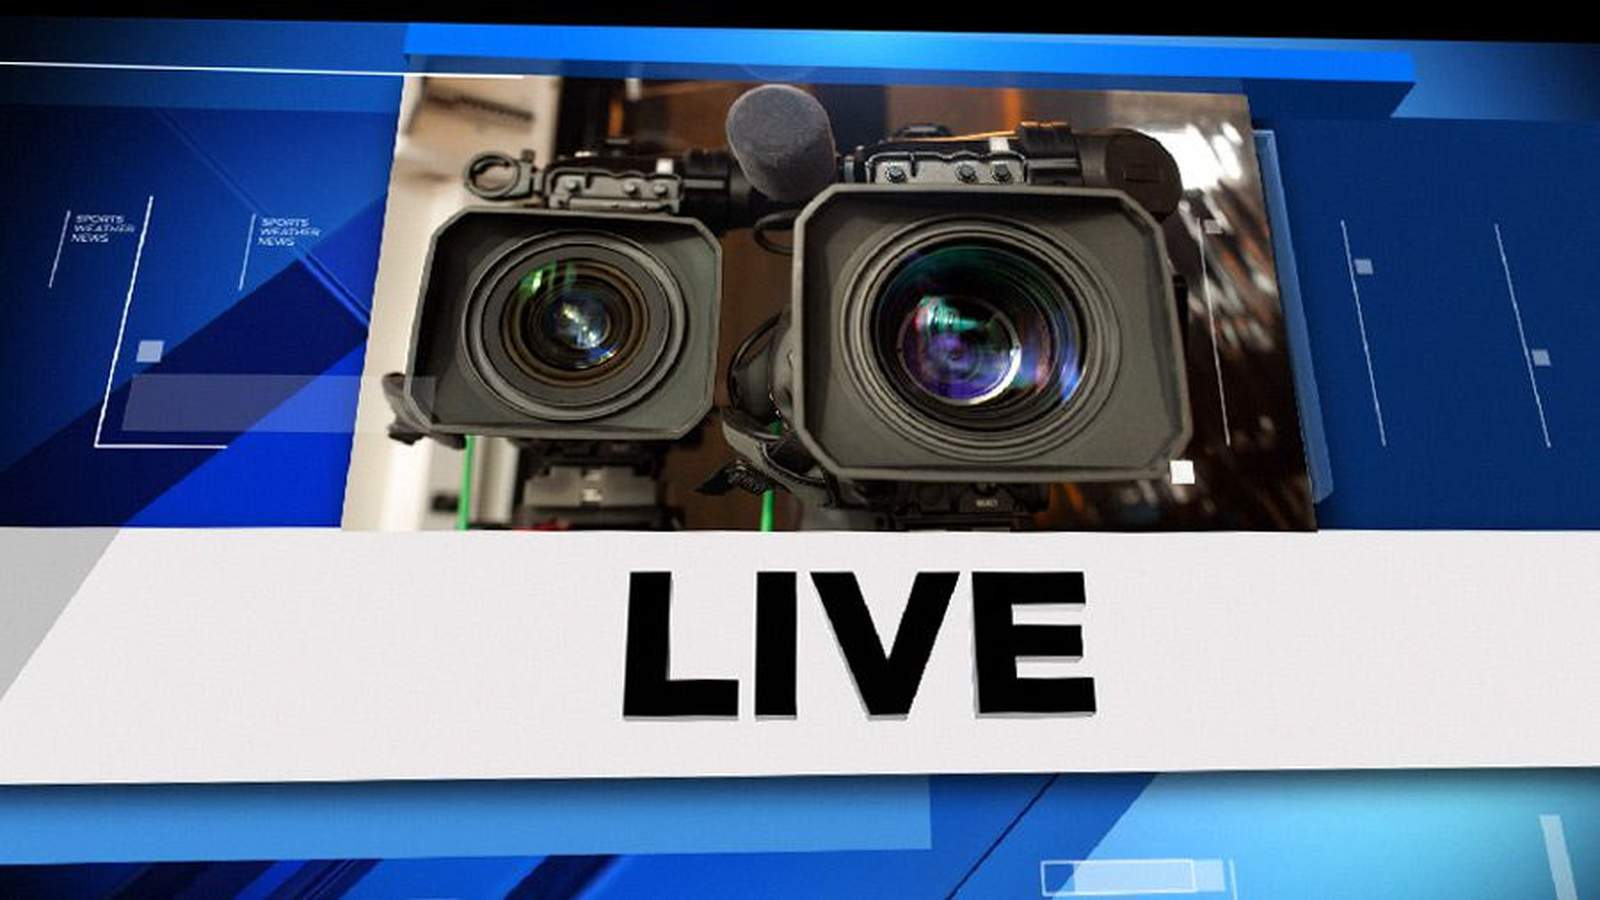 WATCH LIVE: News4Jax coverage of shooting at Amazon center